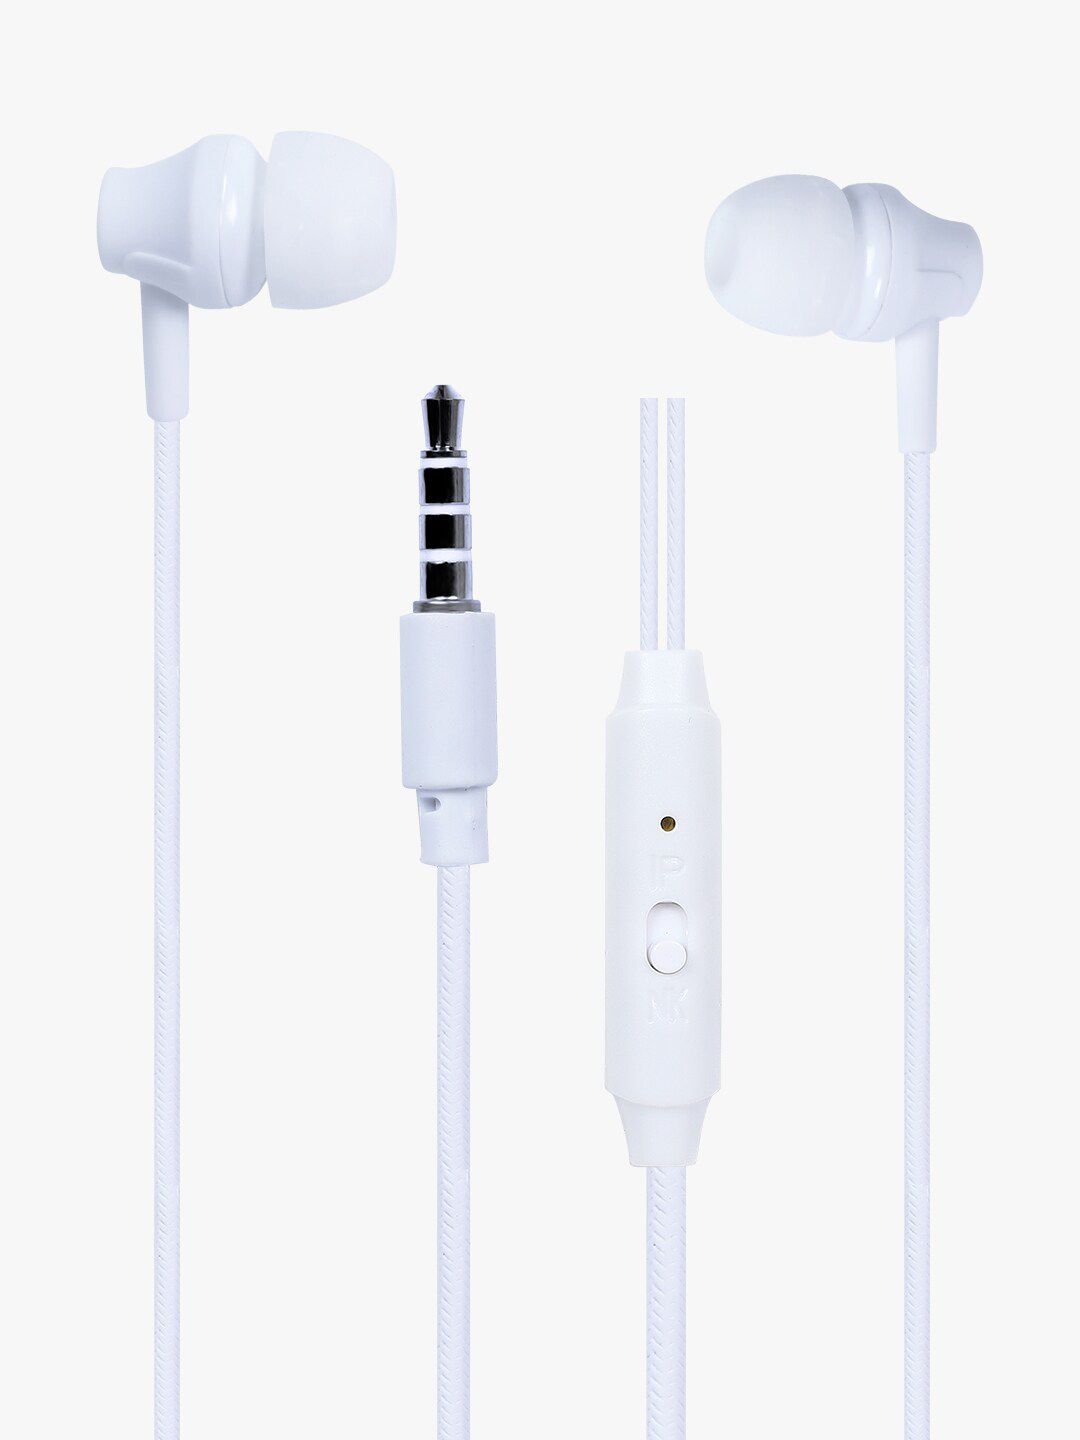 SWAGME White Solid Superbass IE002 In-Ear Wired Earphones With Mic Price in India